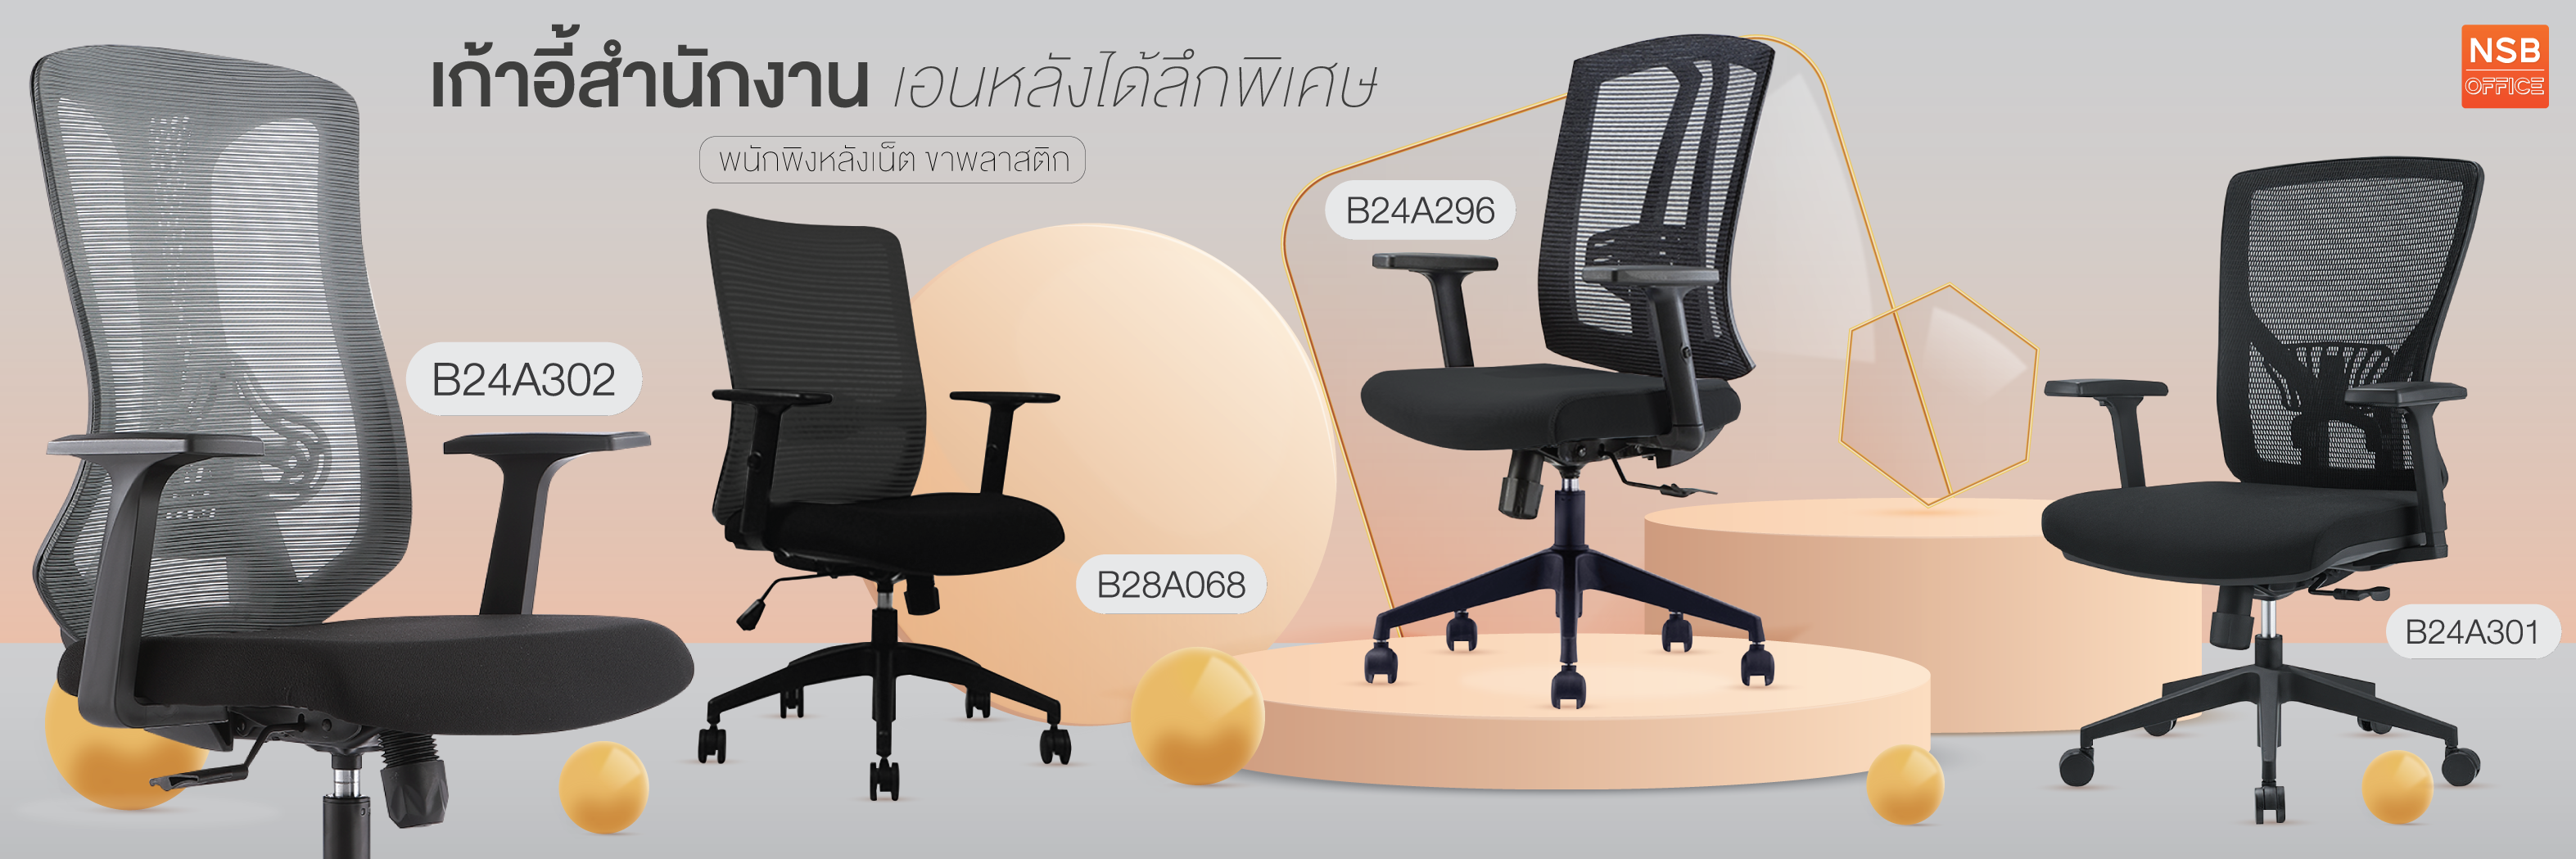 Blog: 4 Mesh office chairs 